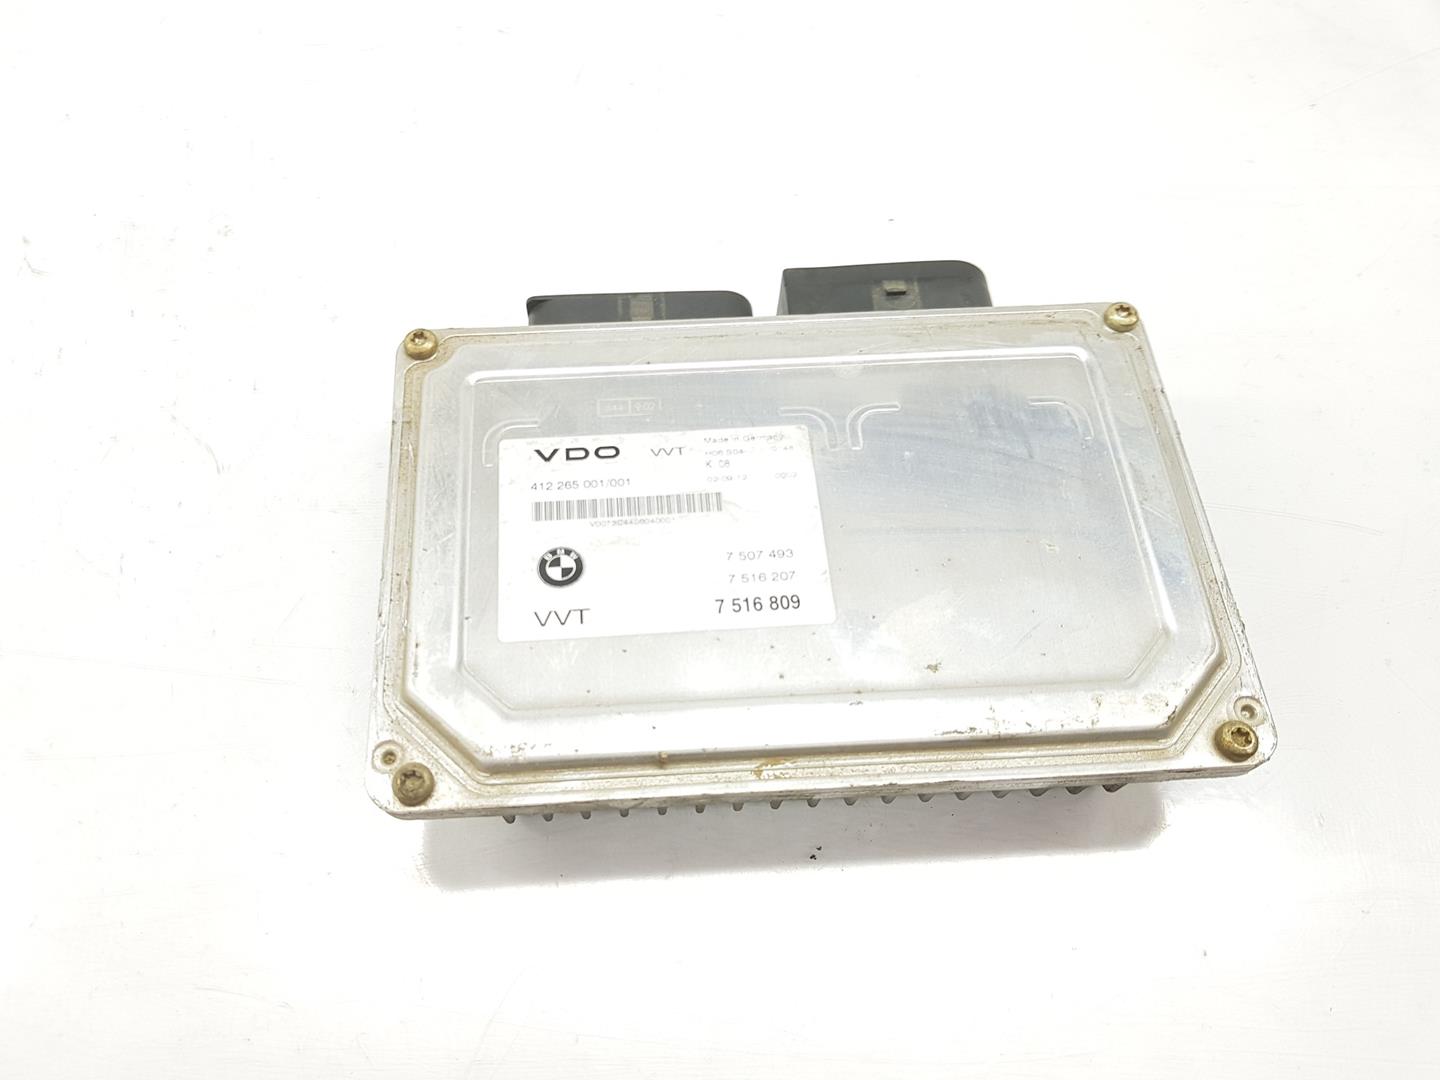 BMW 3 Series E46 (1997-2006) Other Control Units 11377516809, 7516809 19934821